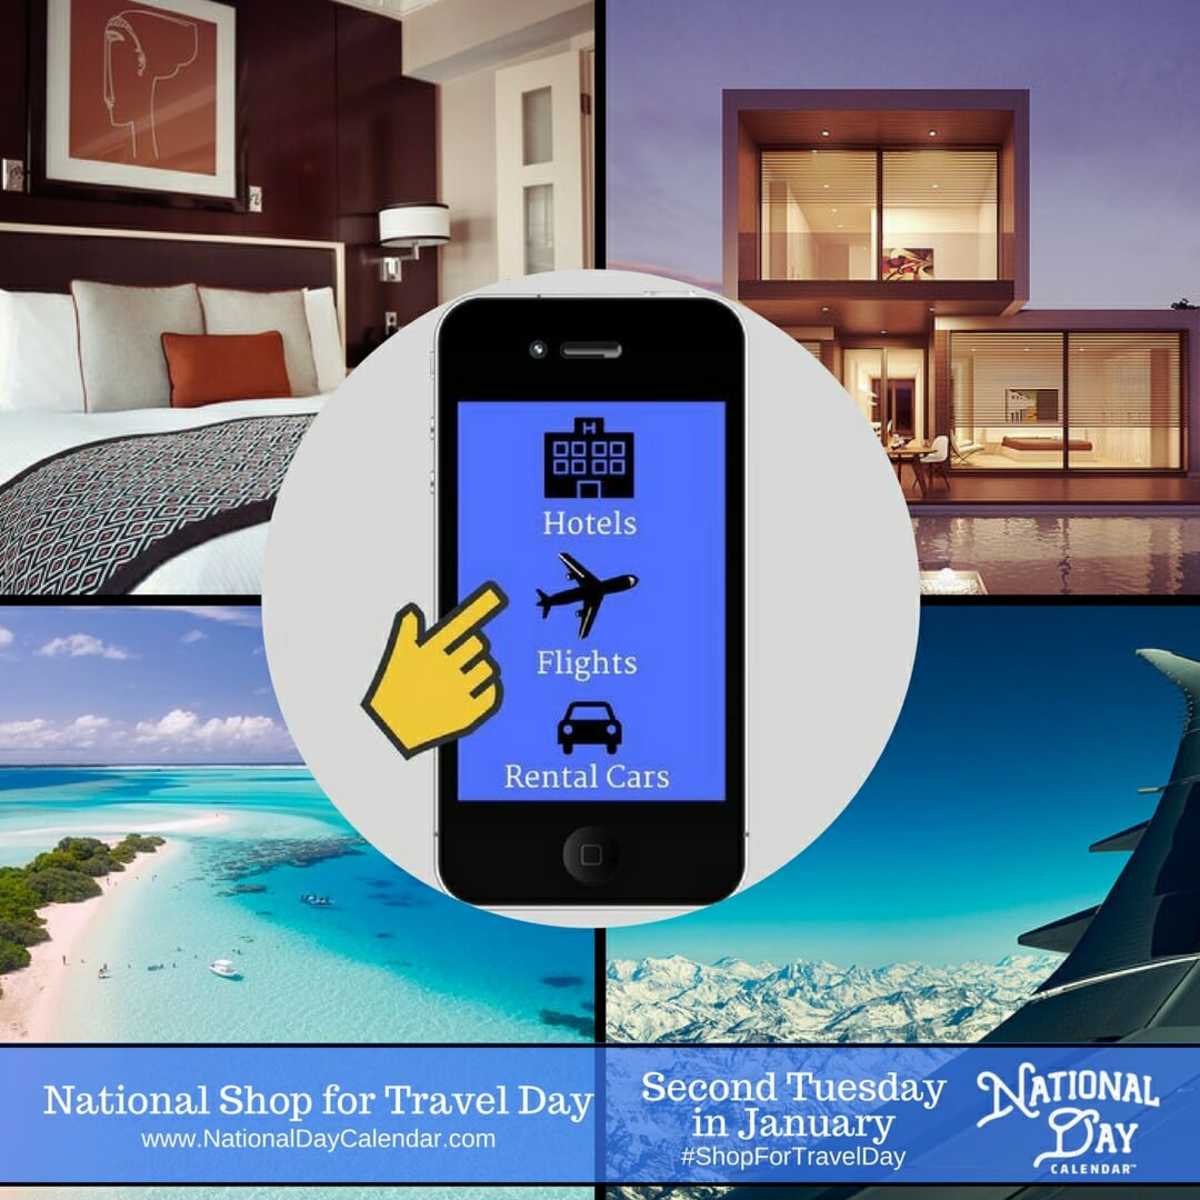 National Shop for Travel Day - Second Tuesday in January